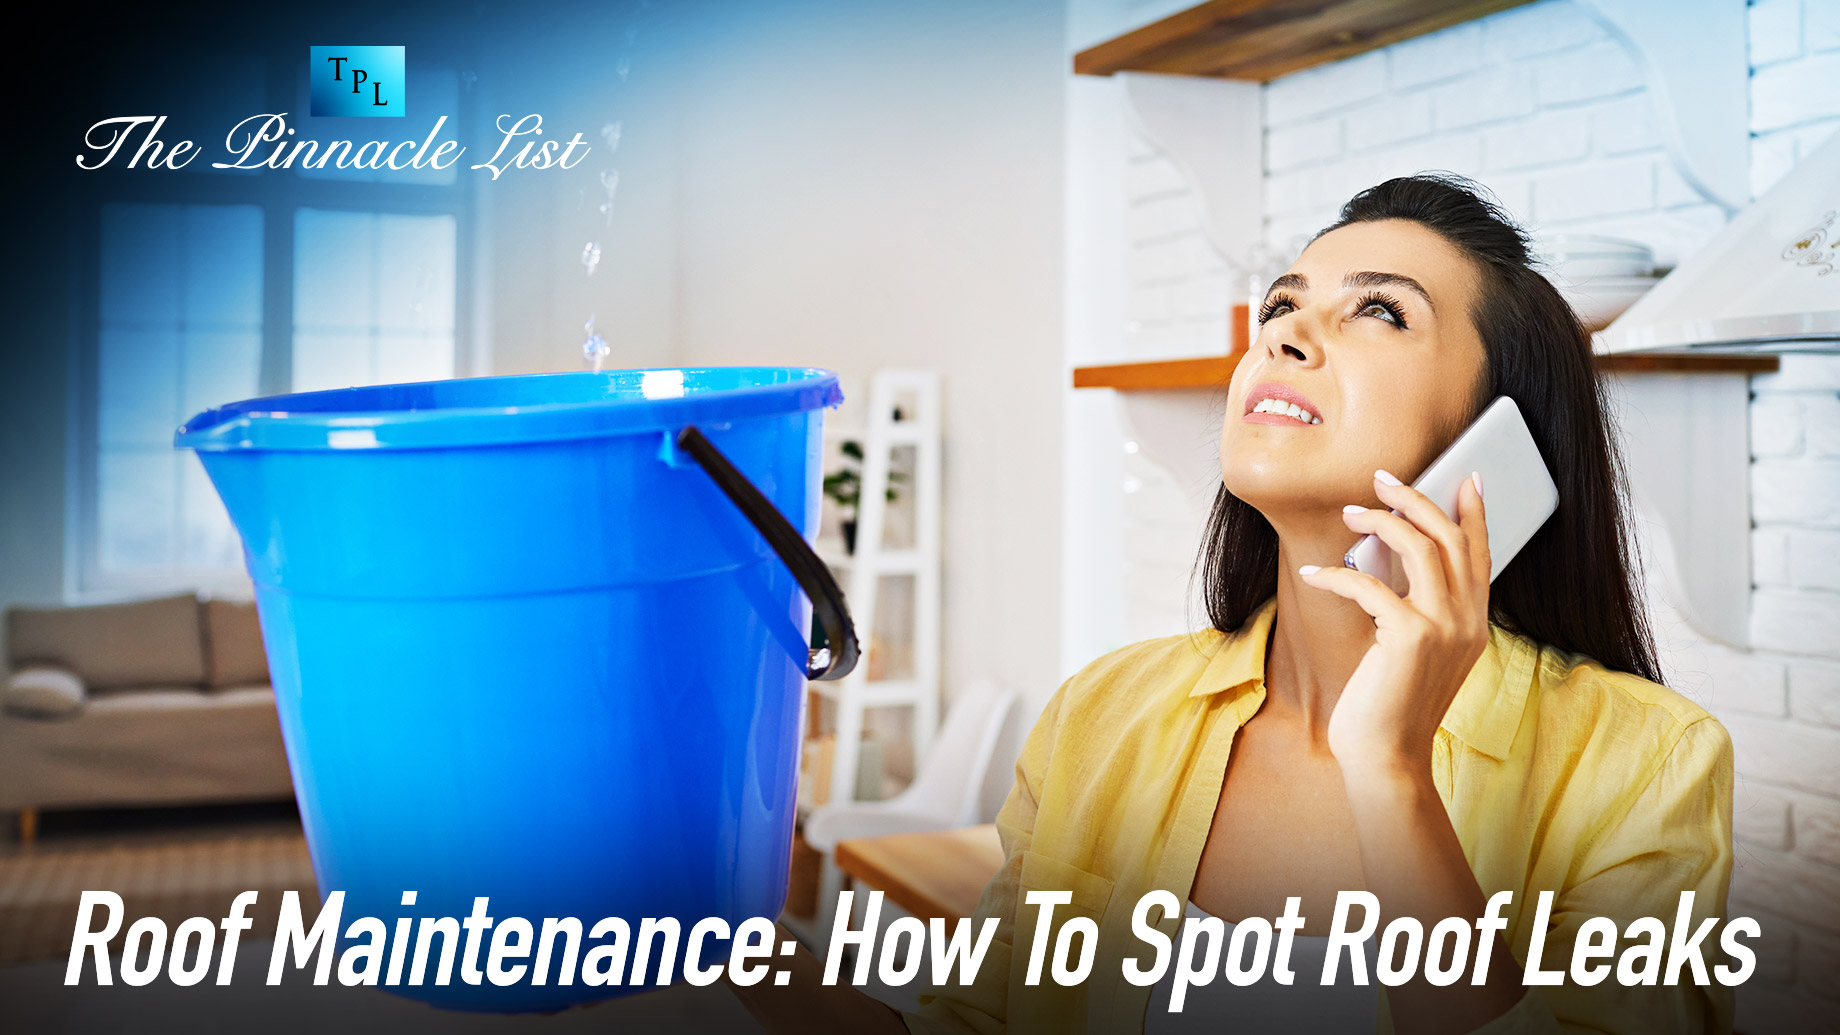 Roof Maintenance: How To Spot Roof Leaks